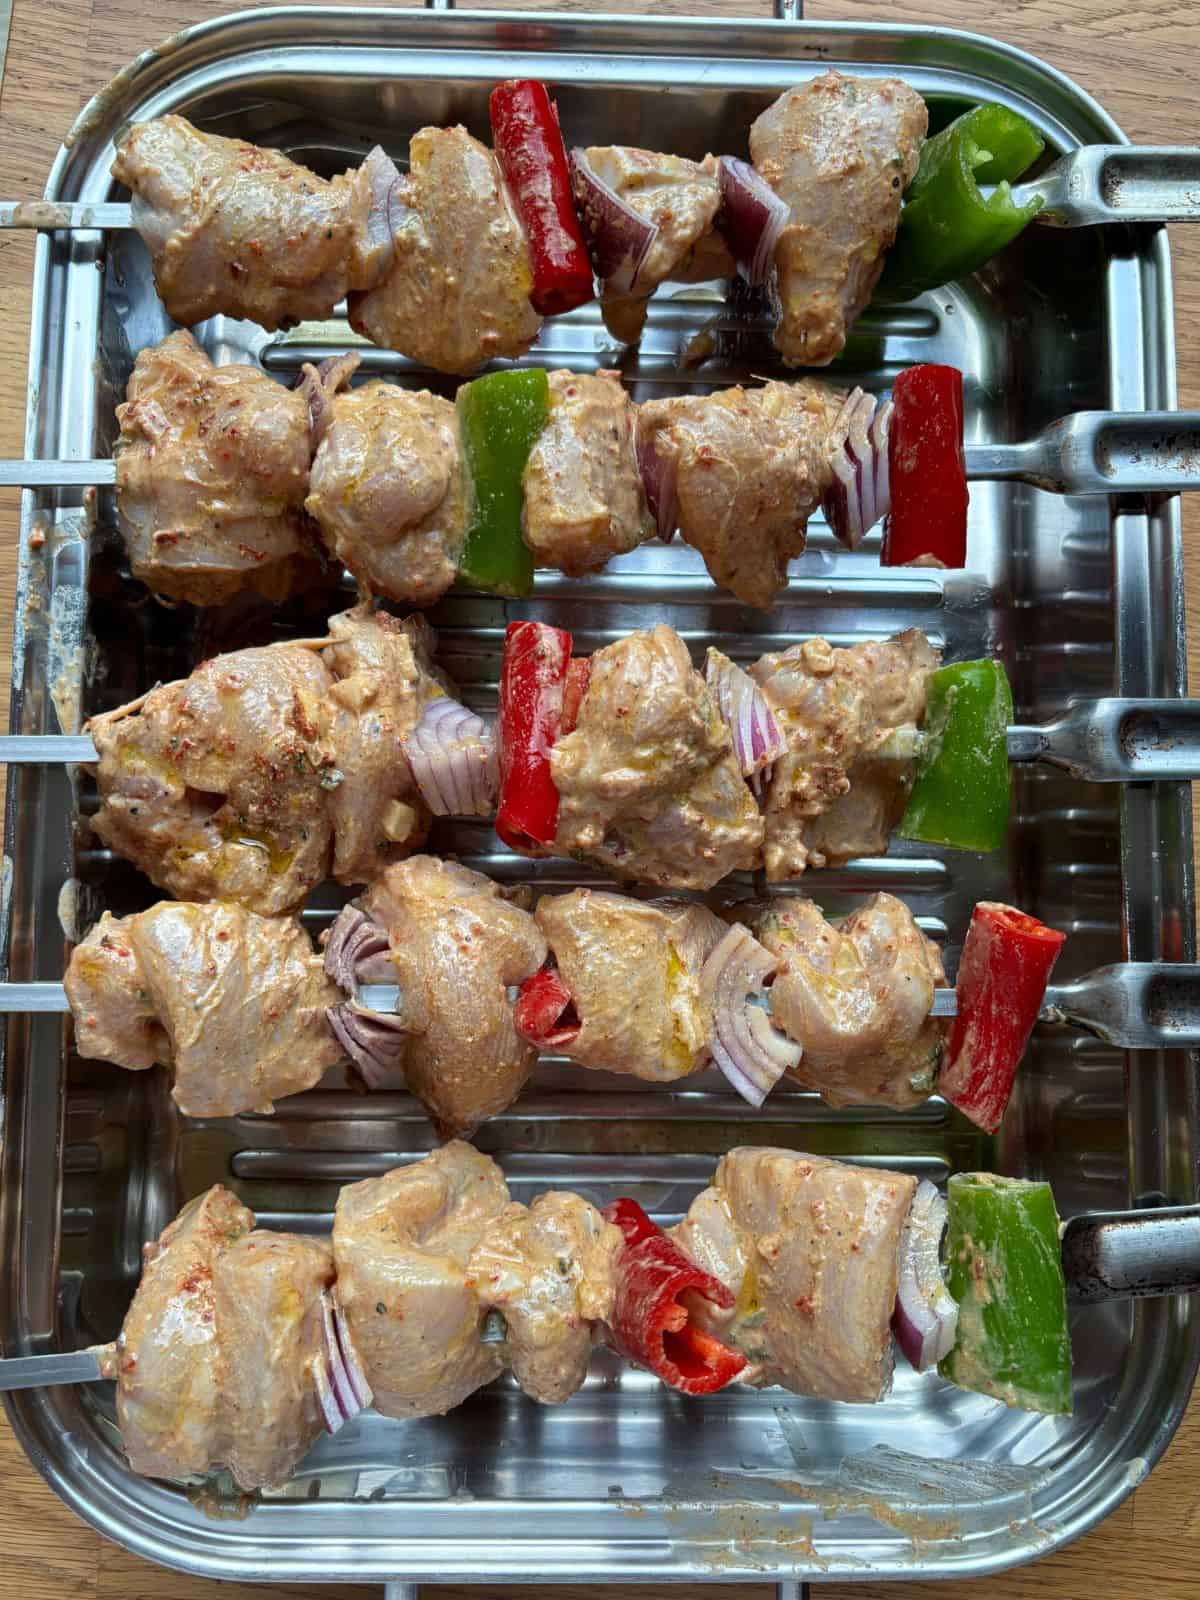 Skewers of marinated chicken with cut peppers and onions on a metal tray ready for grilling.